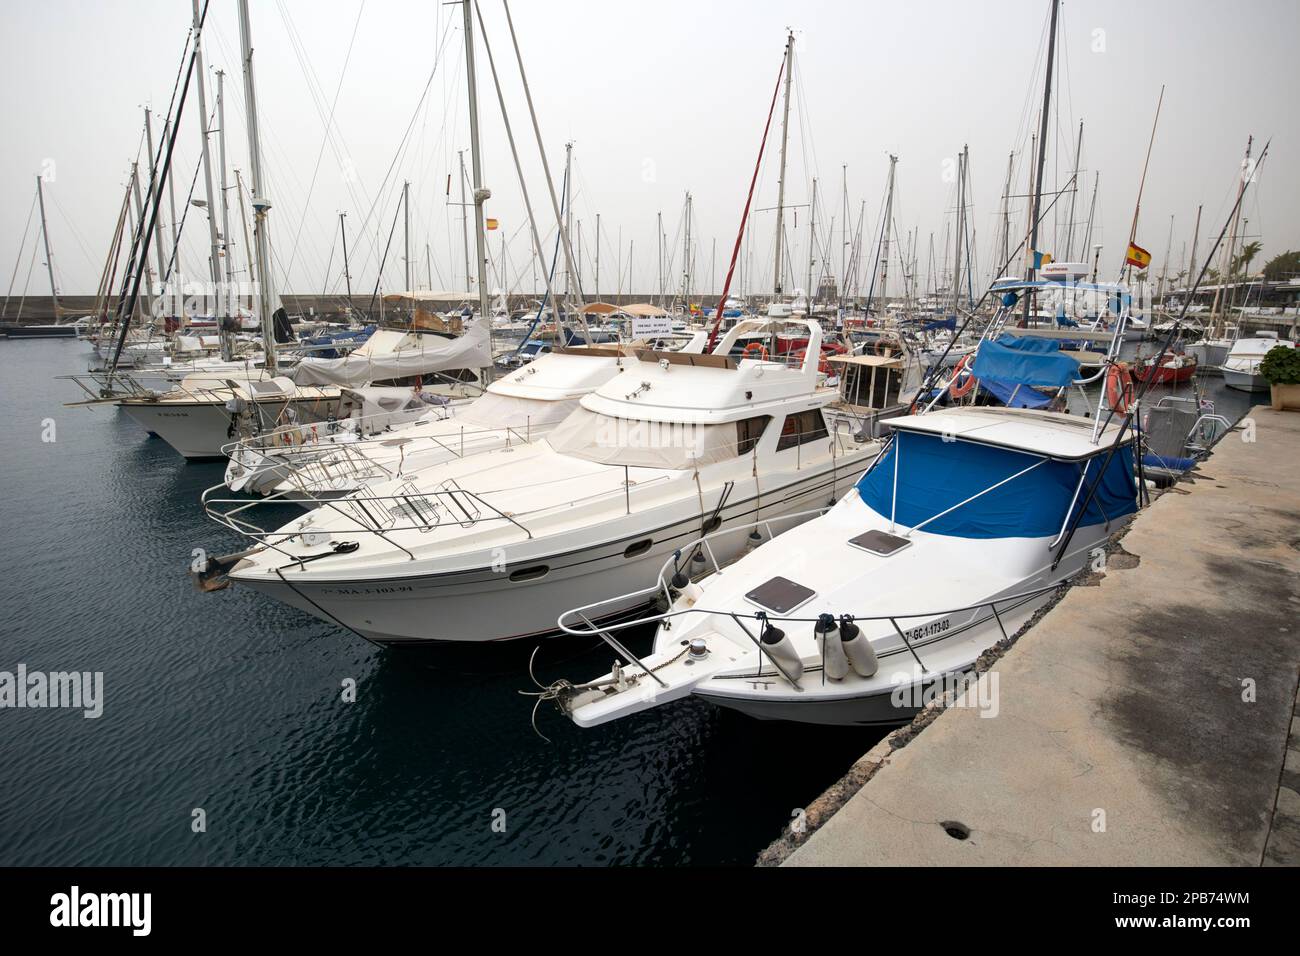 power boats and yachts with winter covers in place during calima in puerto calero marina Lanzarote, Canary Islands, Spain Stock Photo